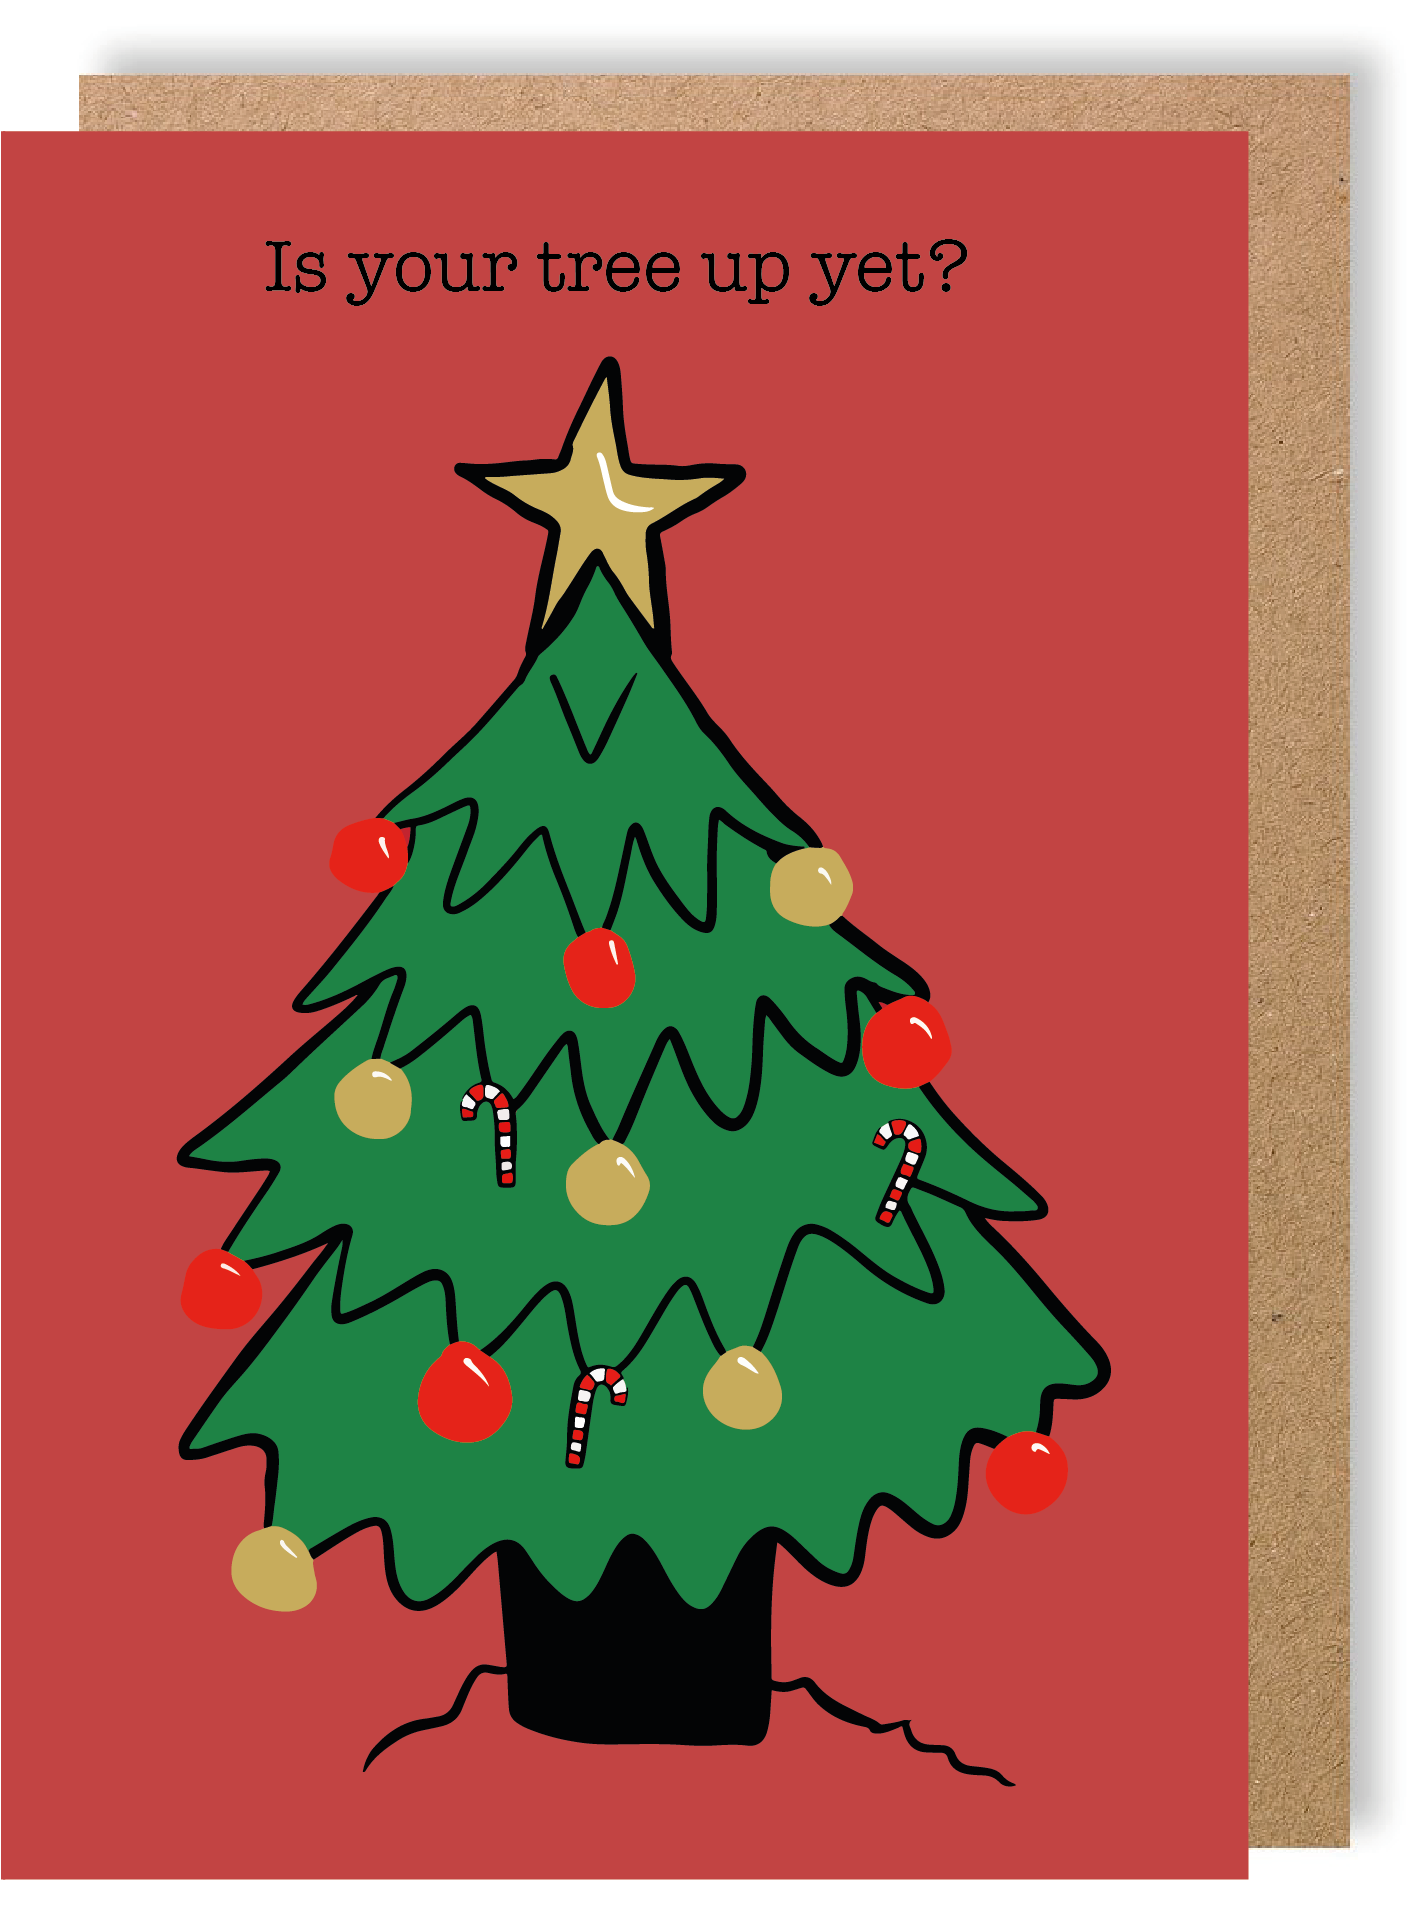 Is Your Tree Up Yet? - Christmas - Greetings Card - LukeHorton Art